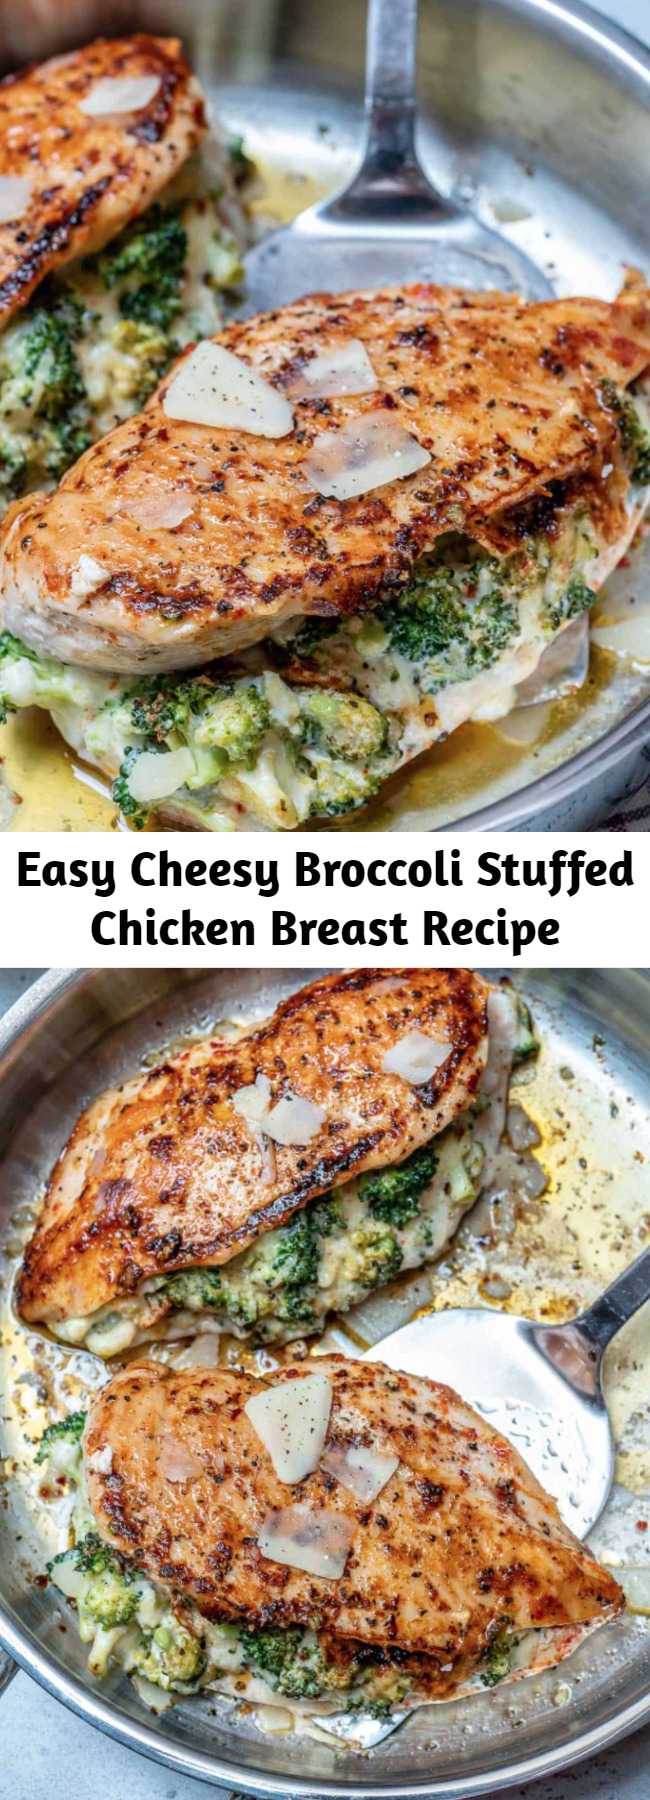 Easy Cheesy Broccoli Stuffed Chicken Breast Recipe - These stuffed chicken breasts are easy to make and delicious that’s loaded with a cheese and broccoli mixture for a perfect low carb and tasty meal. Chicken breast stuffed with a cheesy broccoli mixture, seared then baked to perfection.